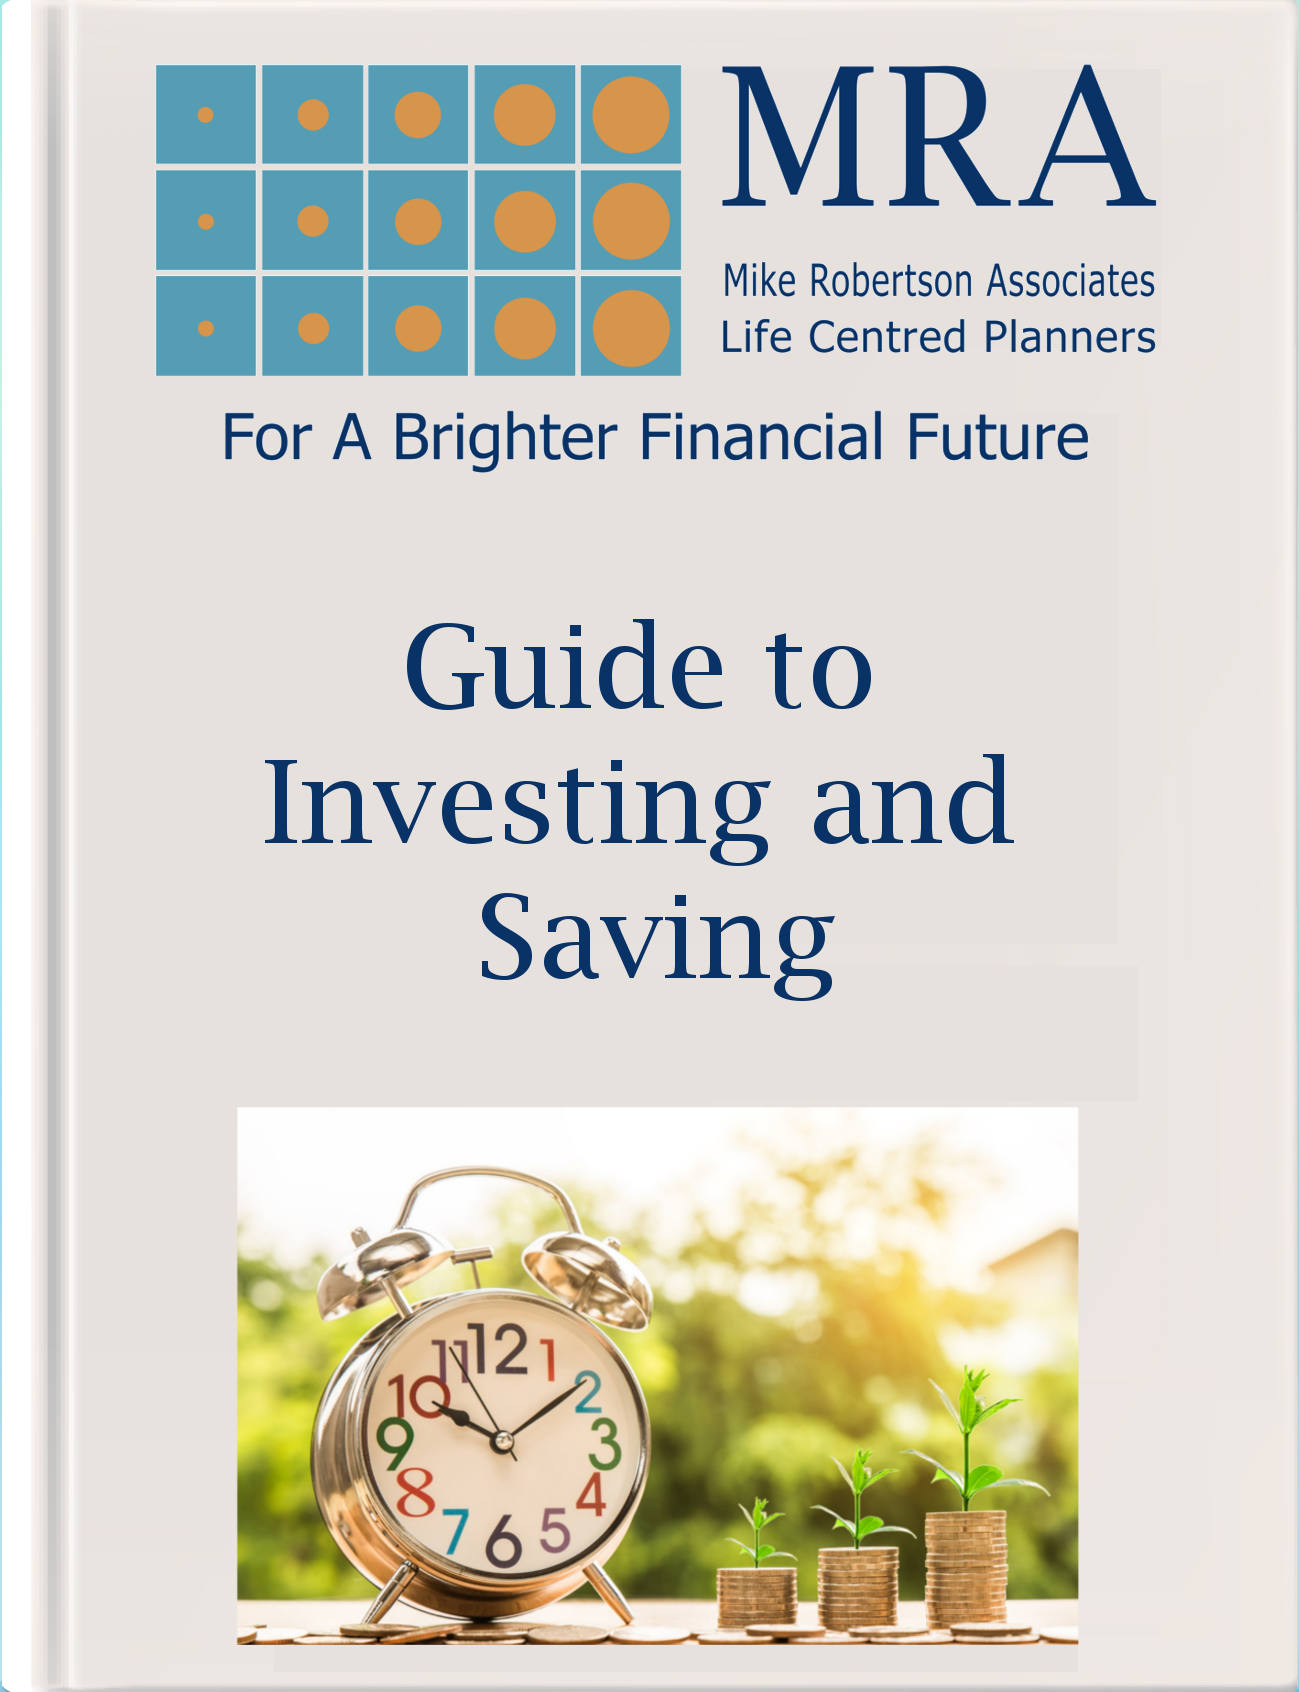 Download our Guide to Investing and Saving